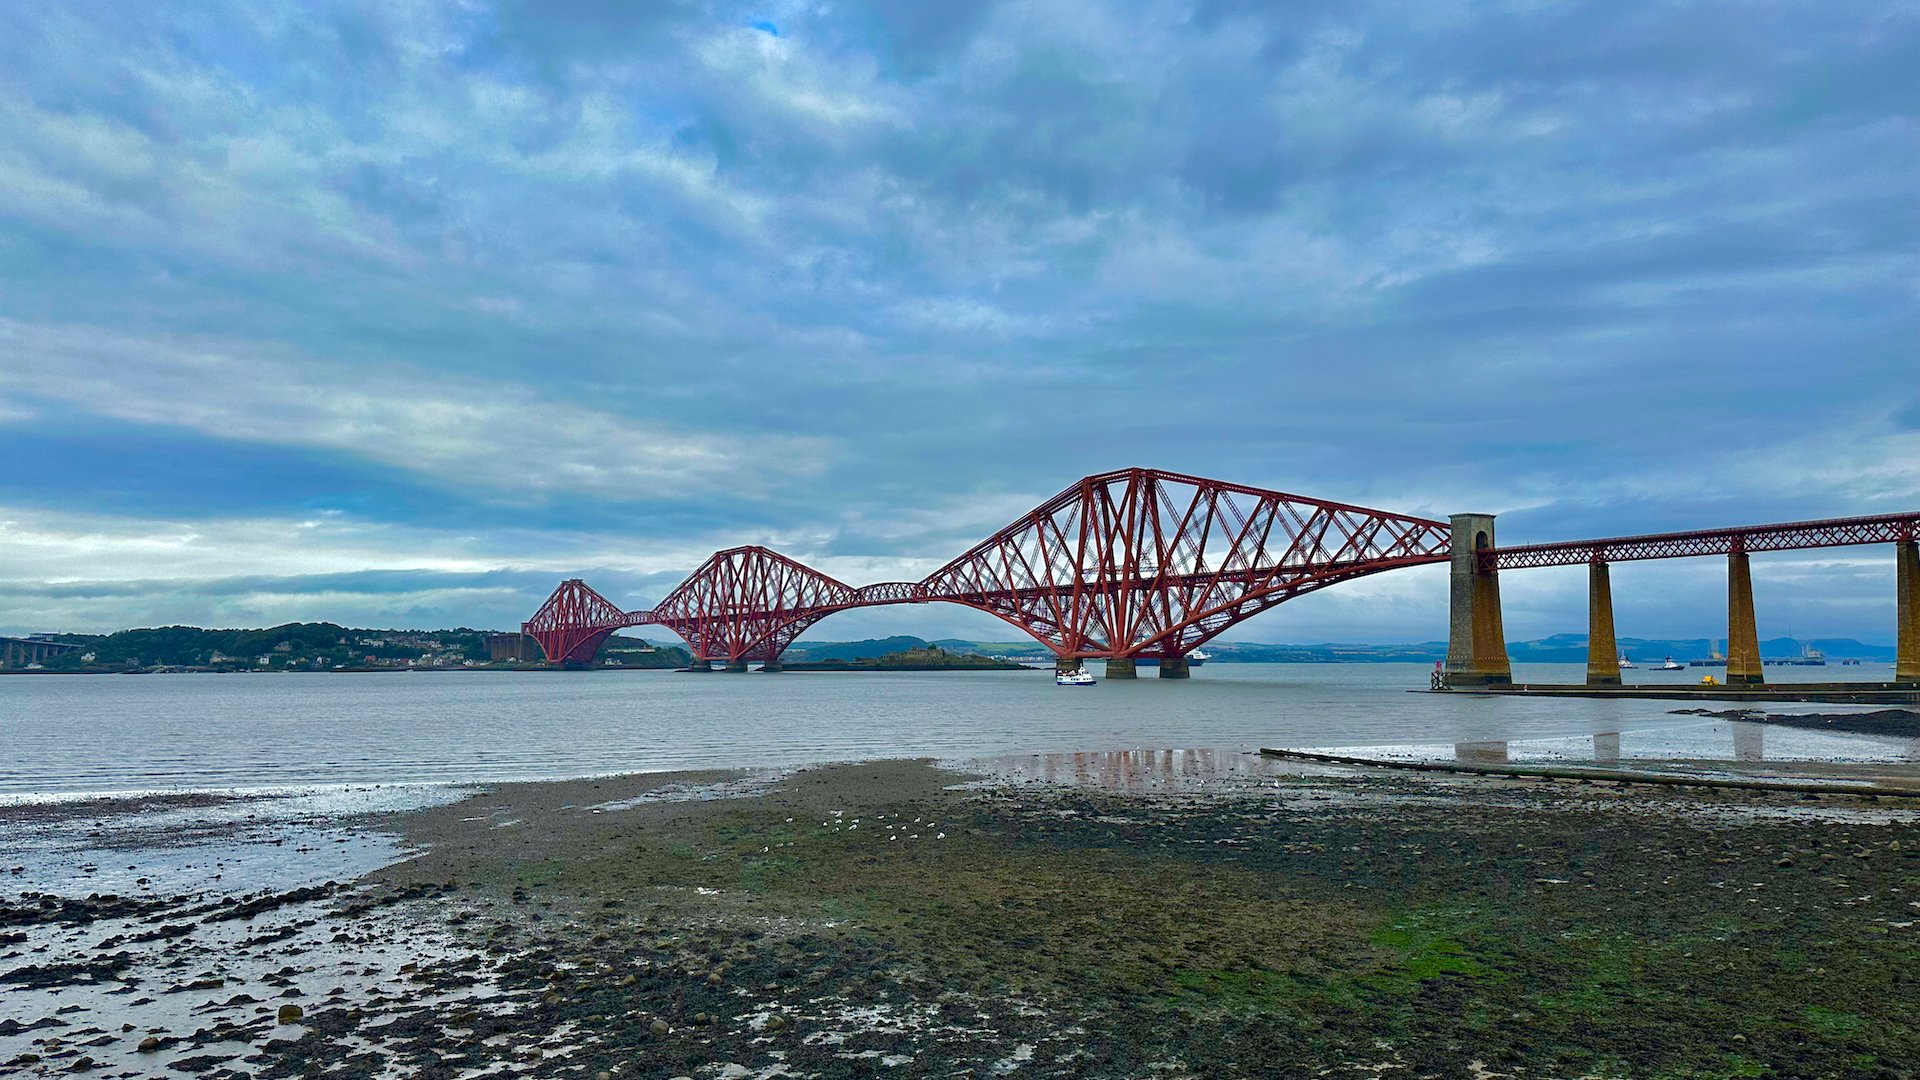  A better view of the Forth Bridge. 